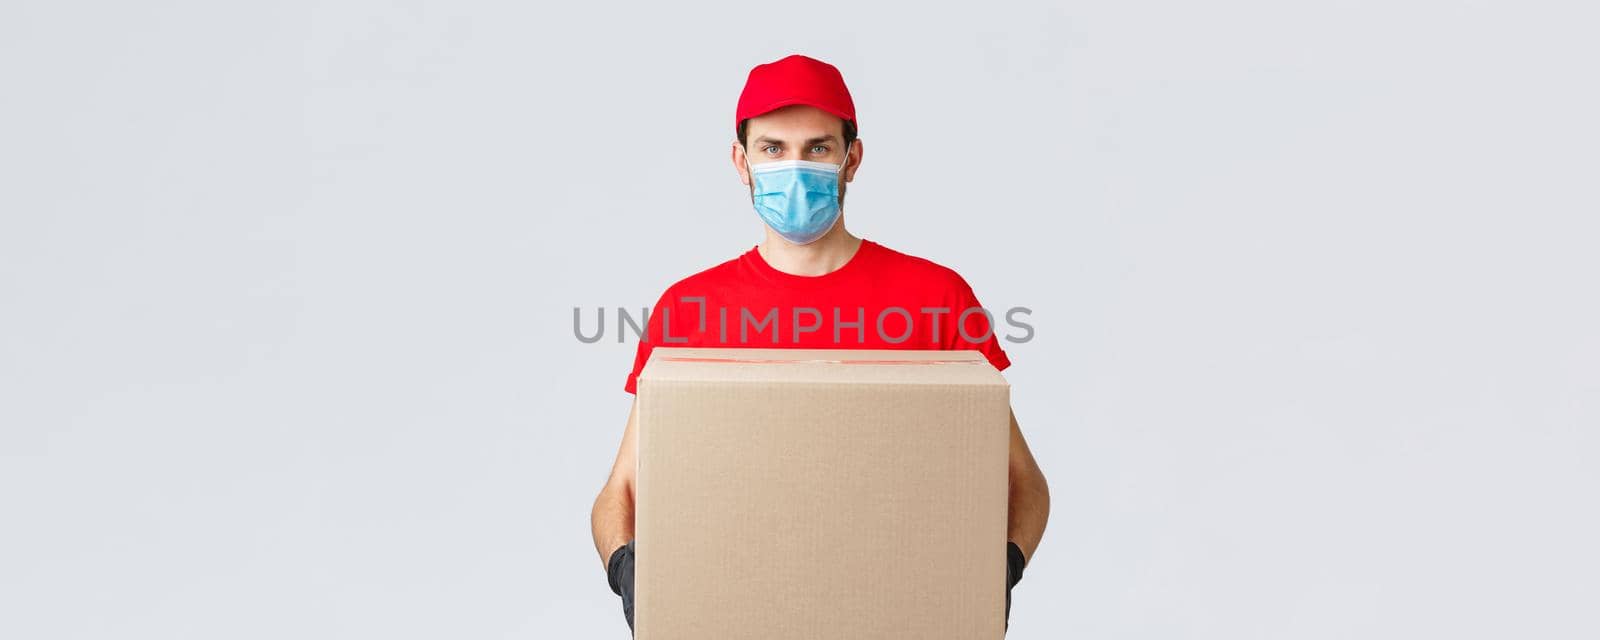 Groceries and packages delivery, covid-19, quarantine and shopping concept. Serious courier in red uniform, gloves and protective face mask, deliver package box to client house during coronavirus.